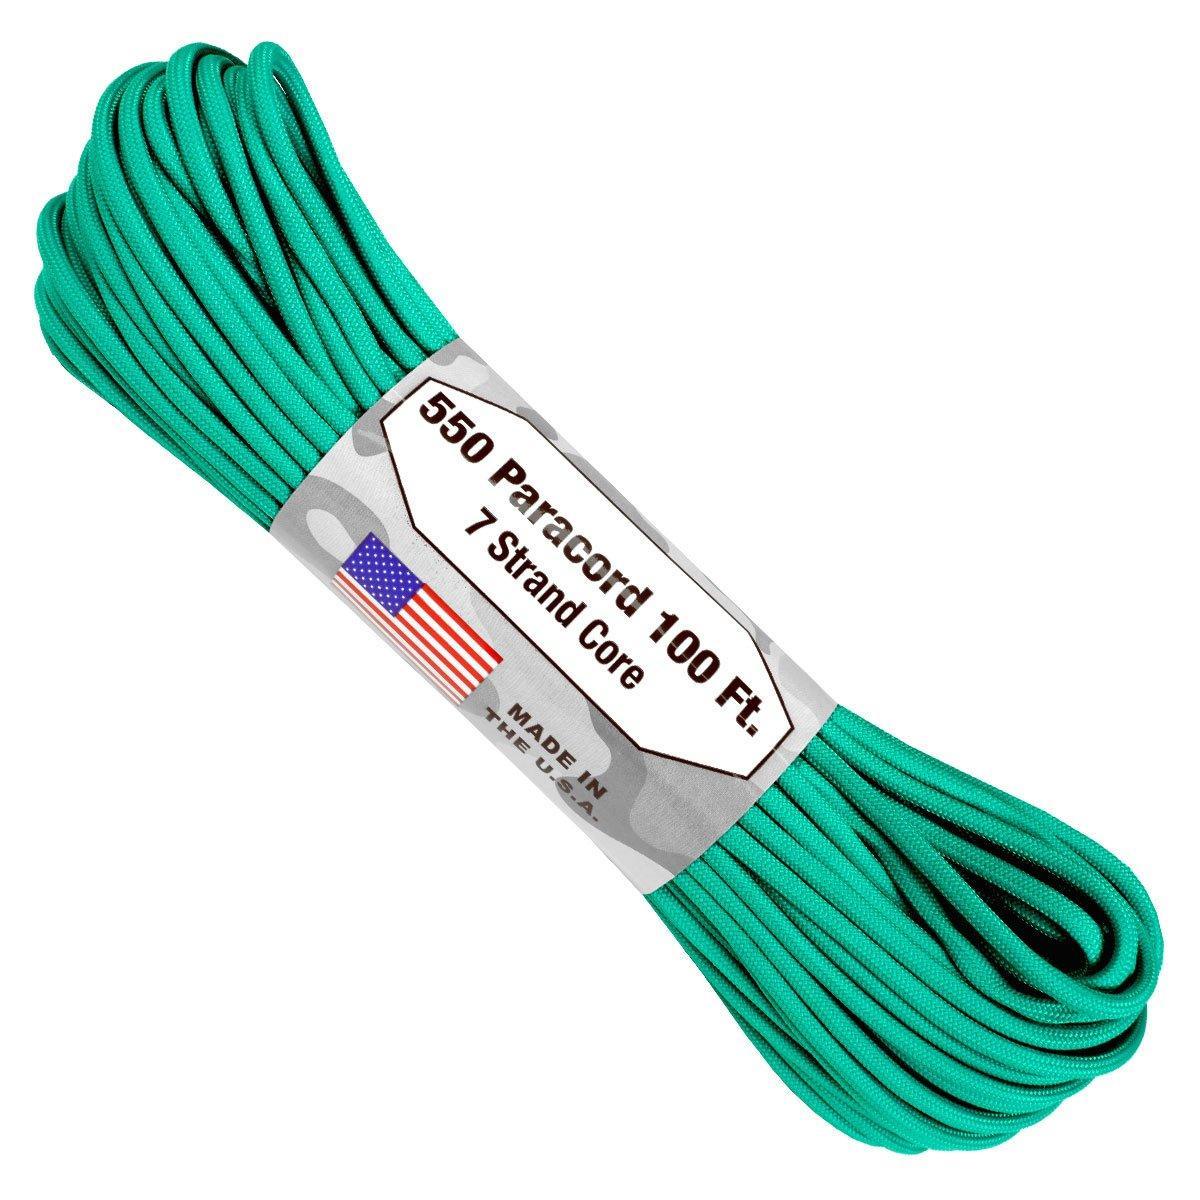 Atwood Paracord - Teal - Cams Cords